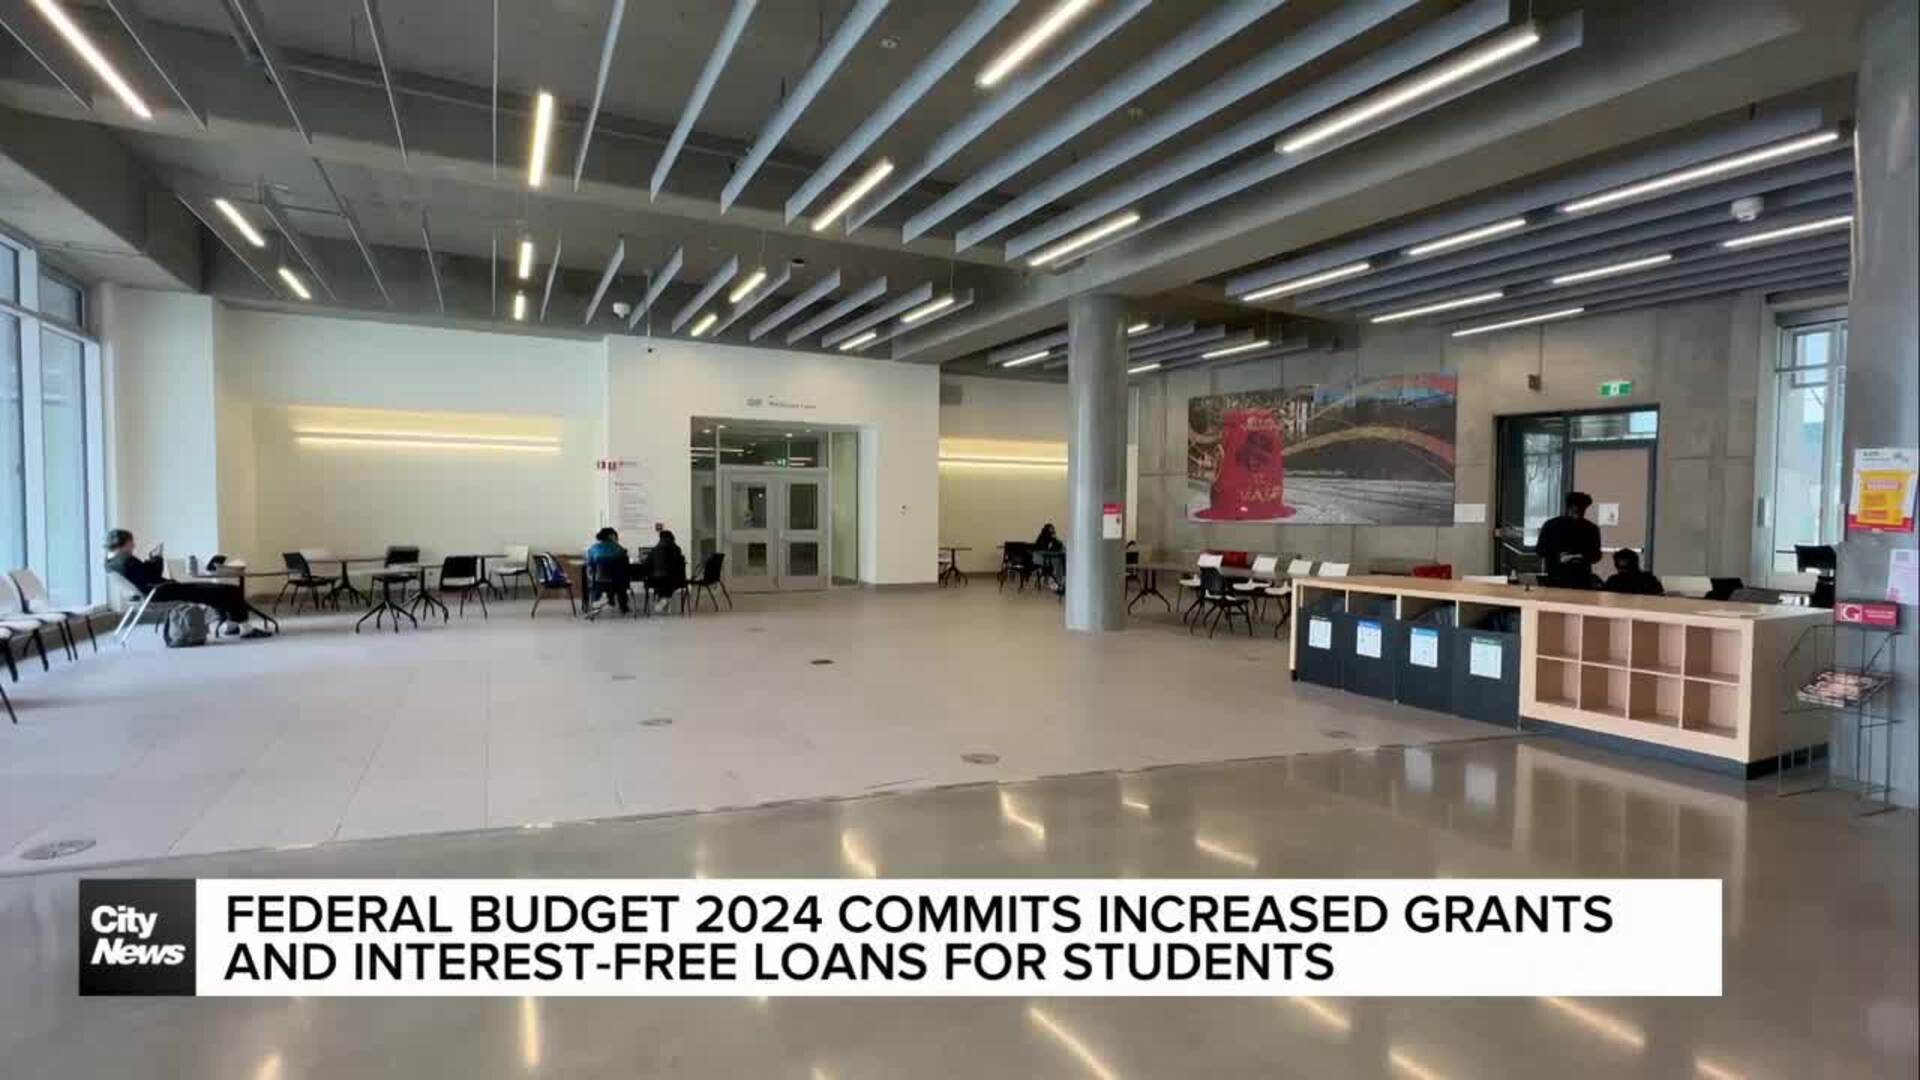 Federal Budget commits increased grants and interest-free loans for students